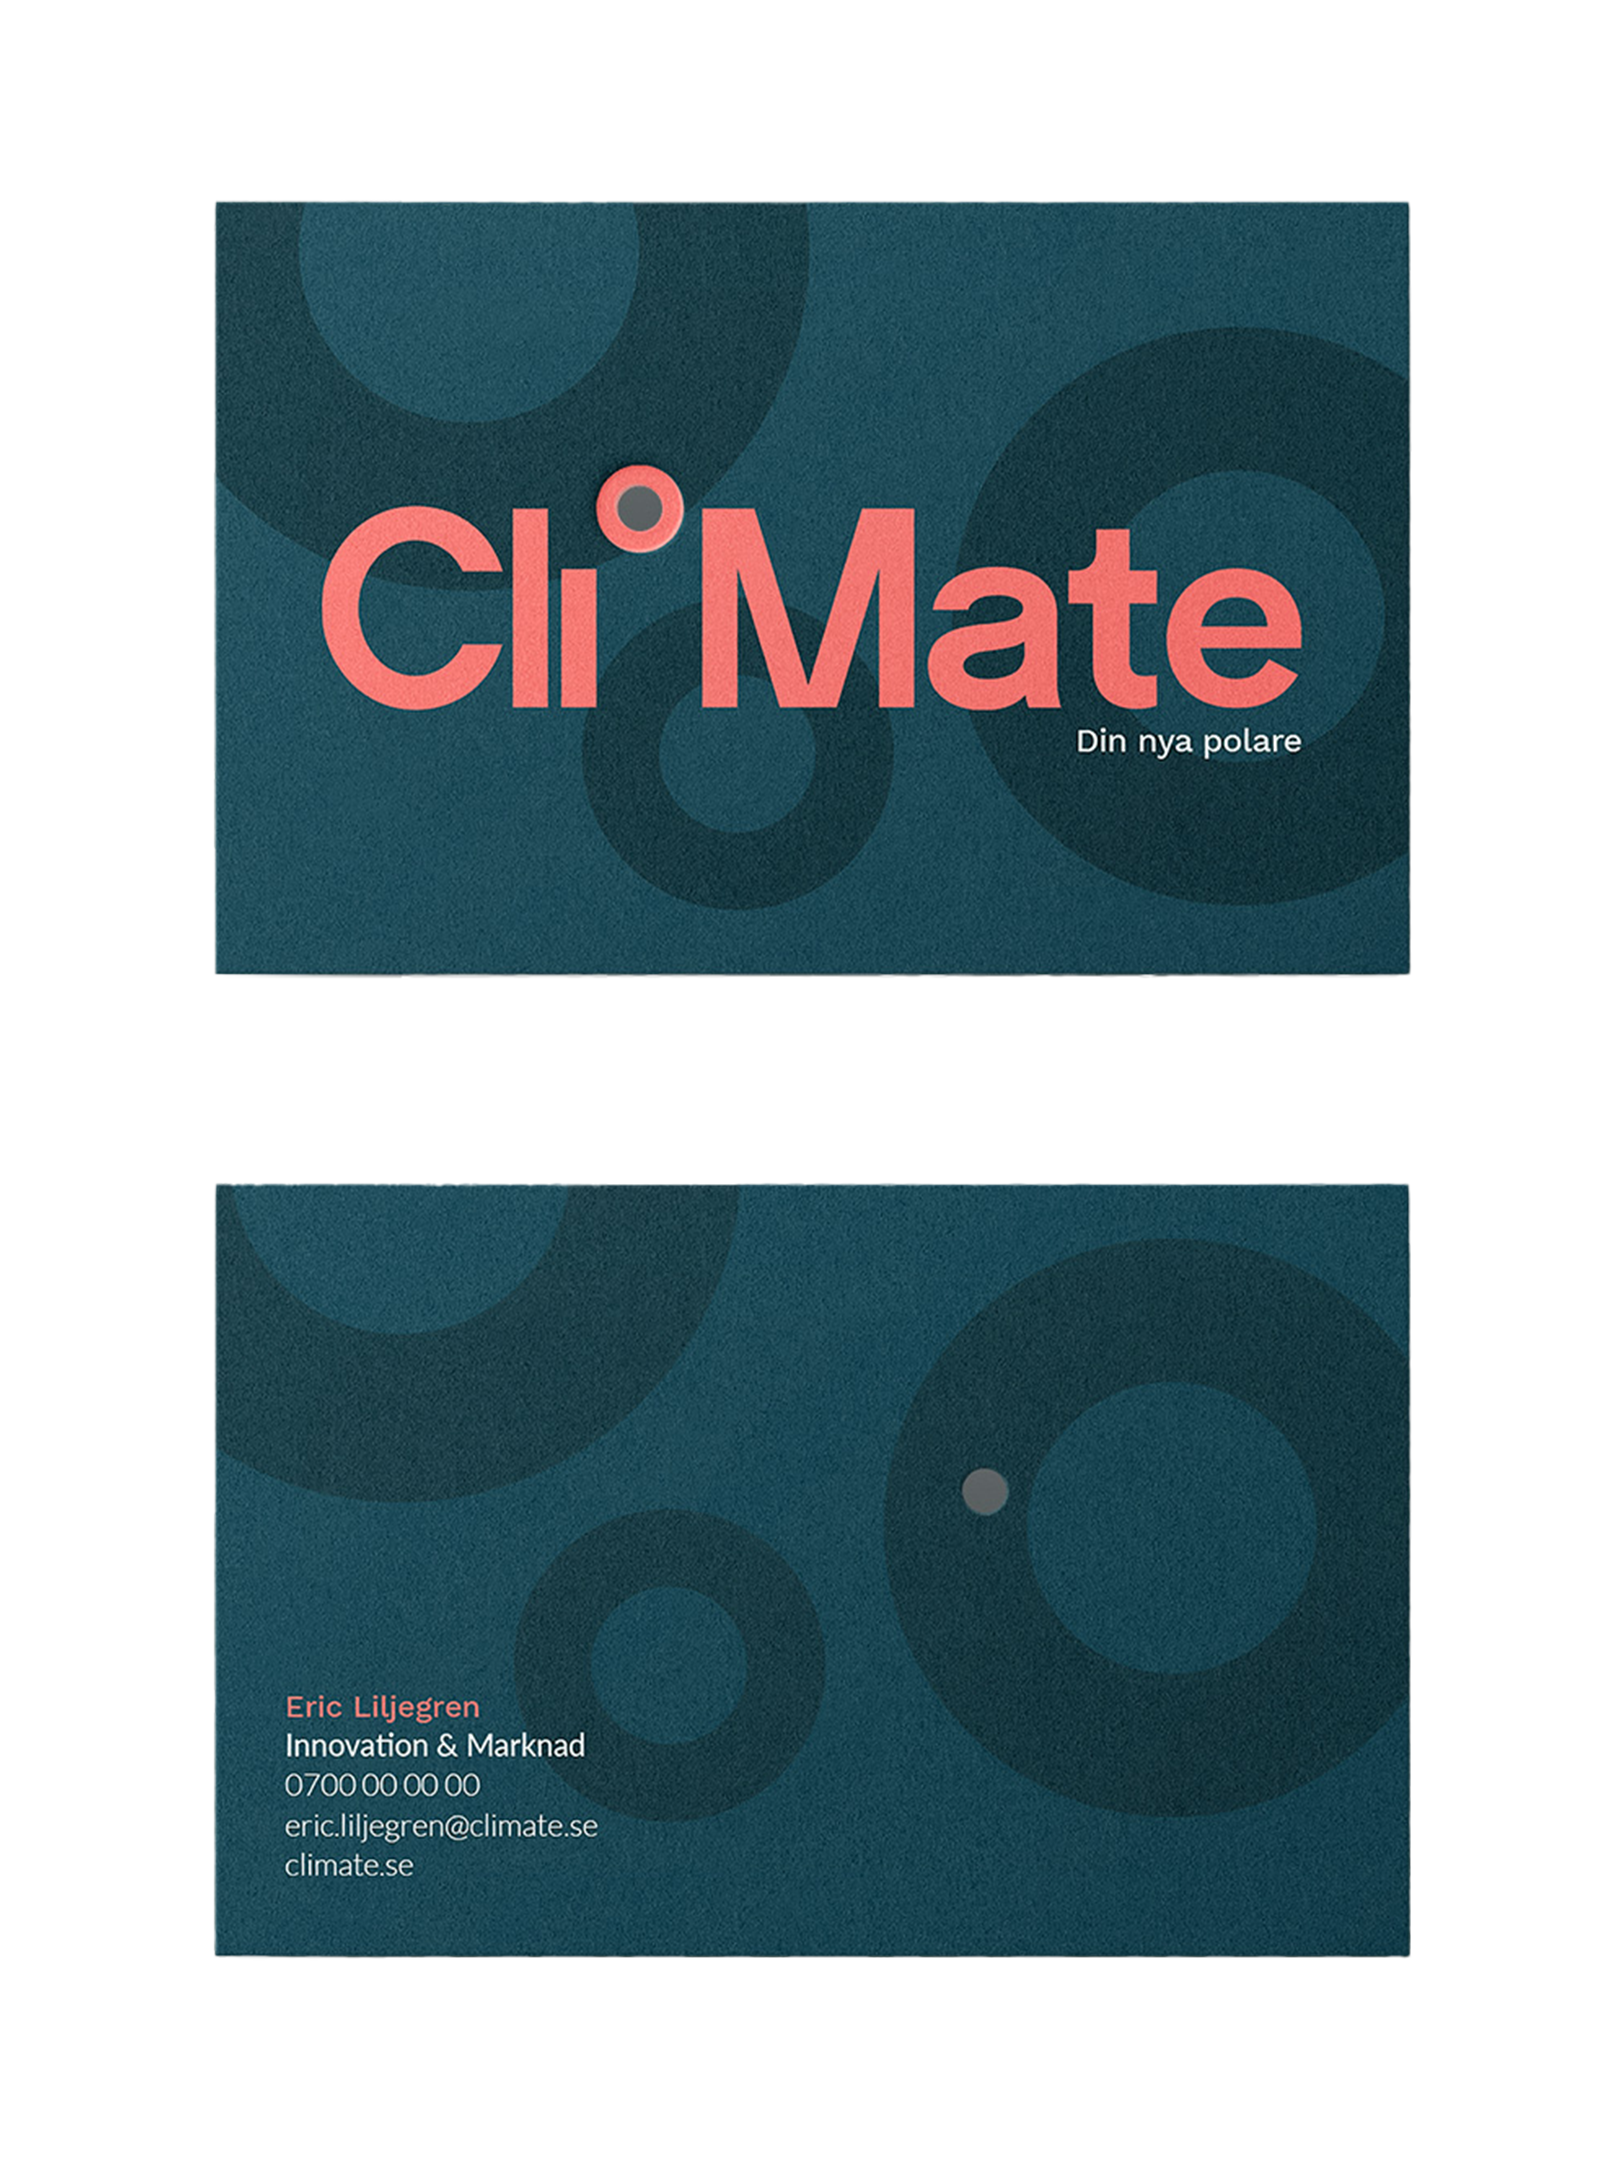 CliMate business cards